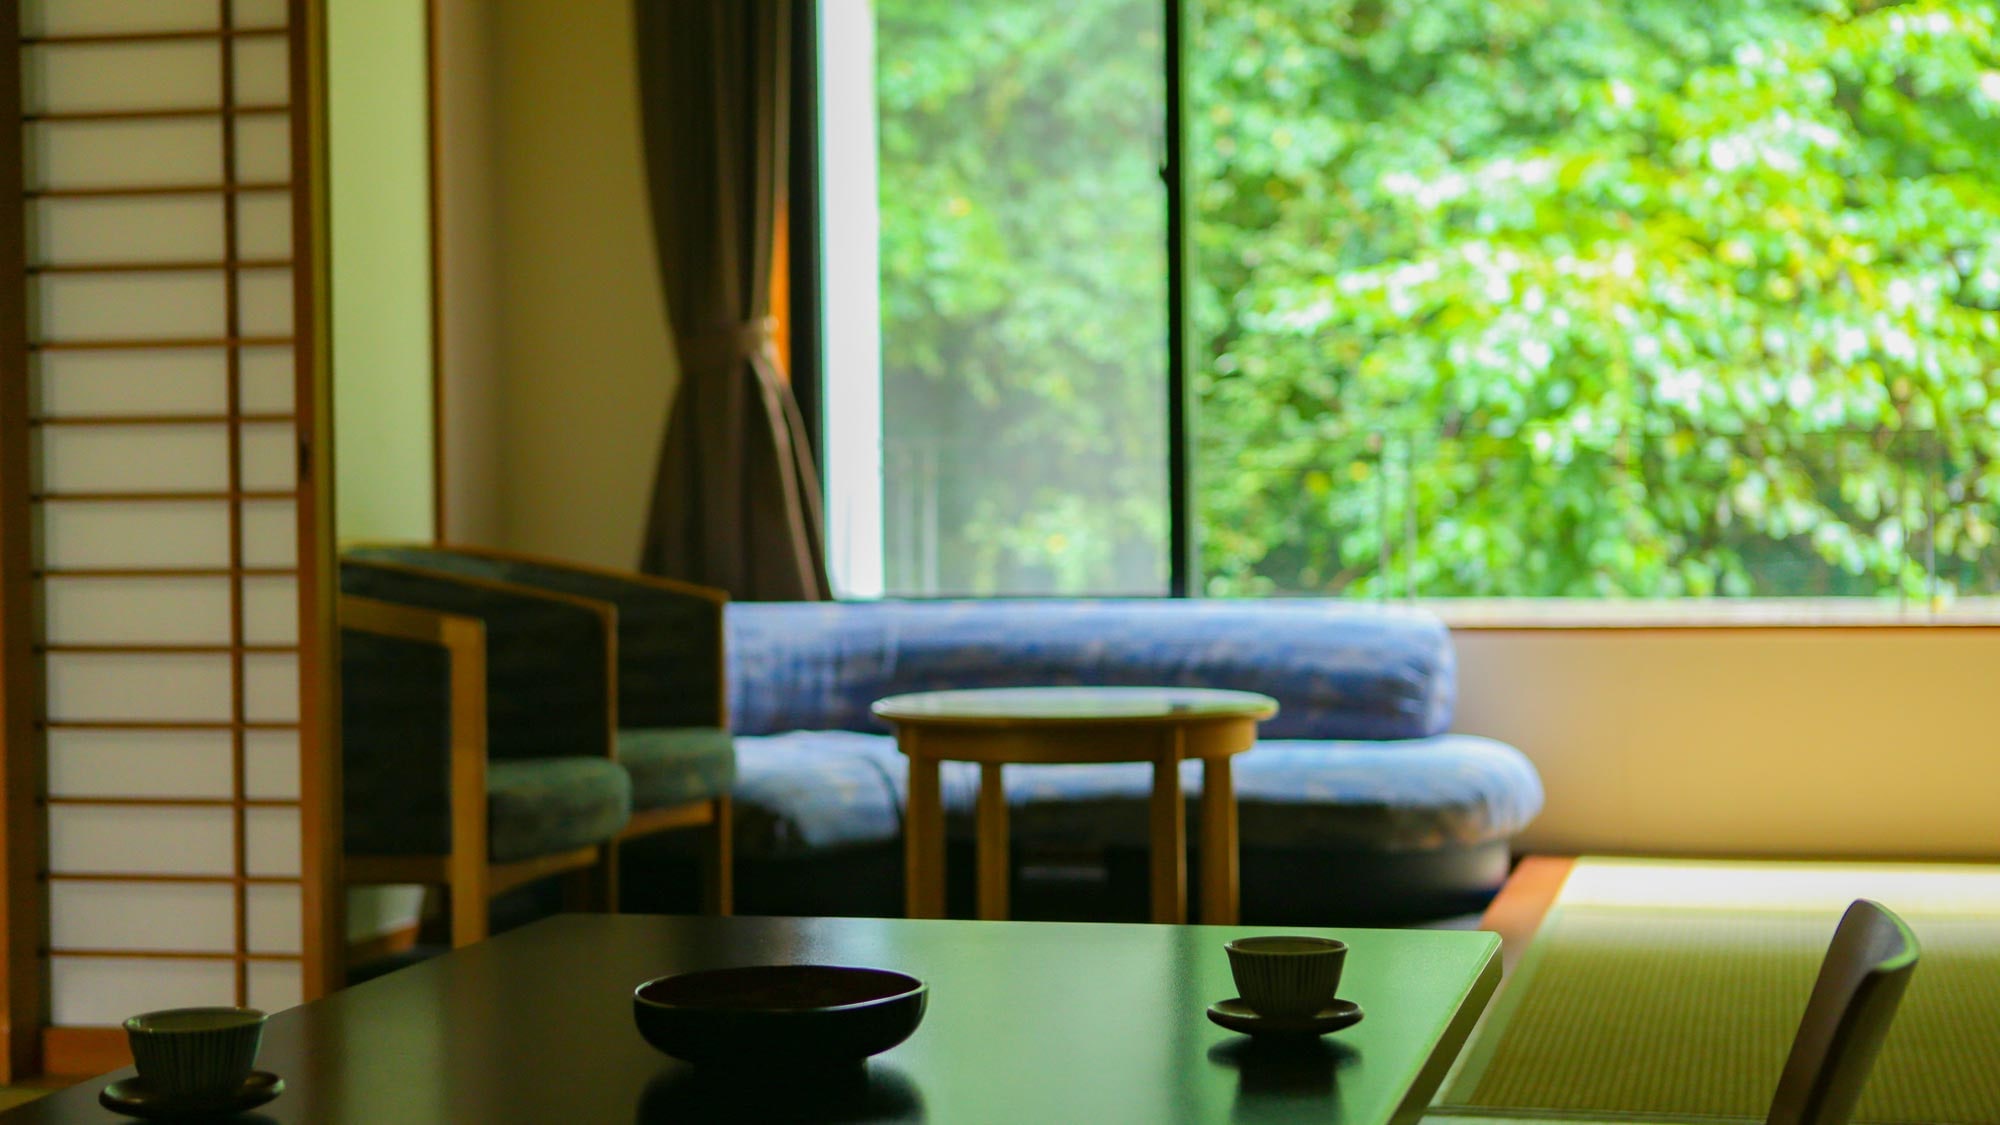 Japanese-style room with a calm atmosphere